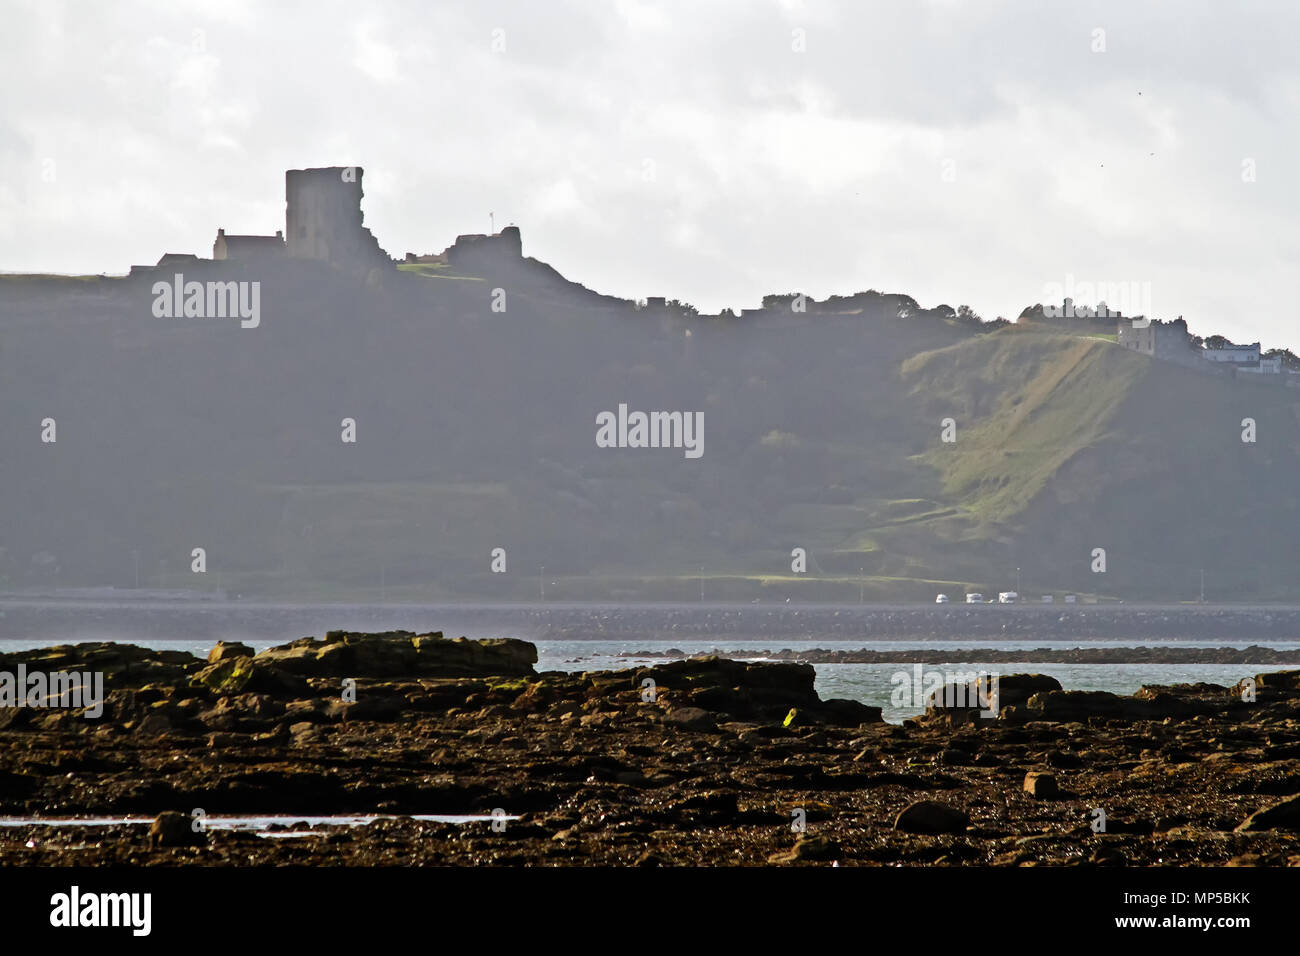 Scarborough’s Castle and headland towering above Marine Drive and North Bay, seen from across the bay at Crook Ness. Stock Photo